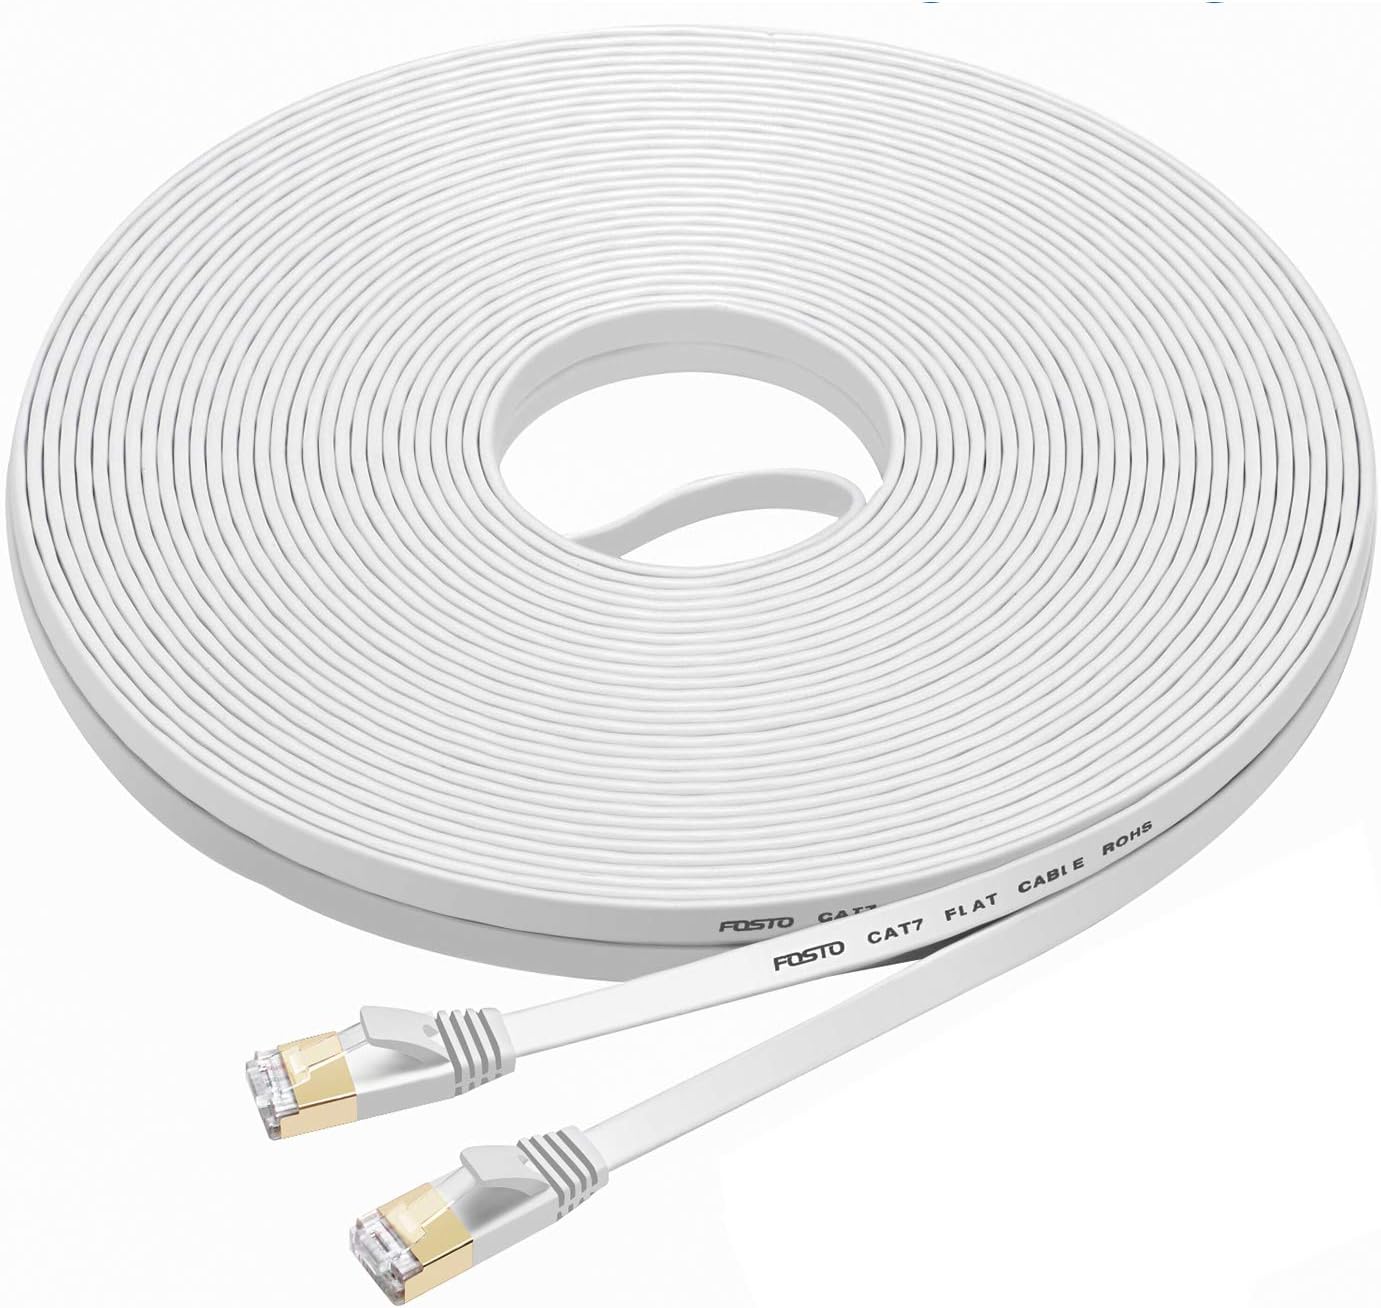 FOSTO Cat7 Ethernet Cable 100 ft,cat 7 Patch Cable [...]